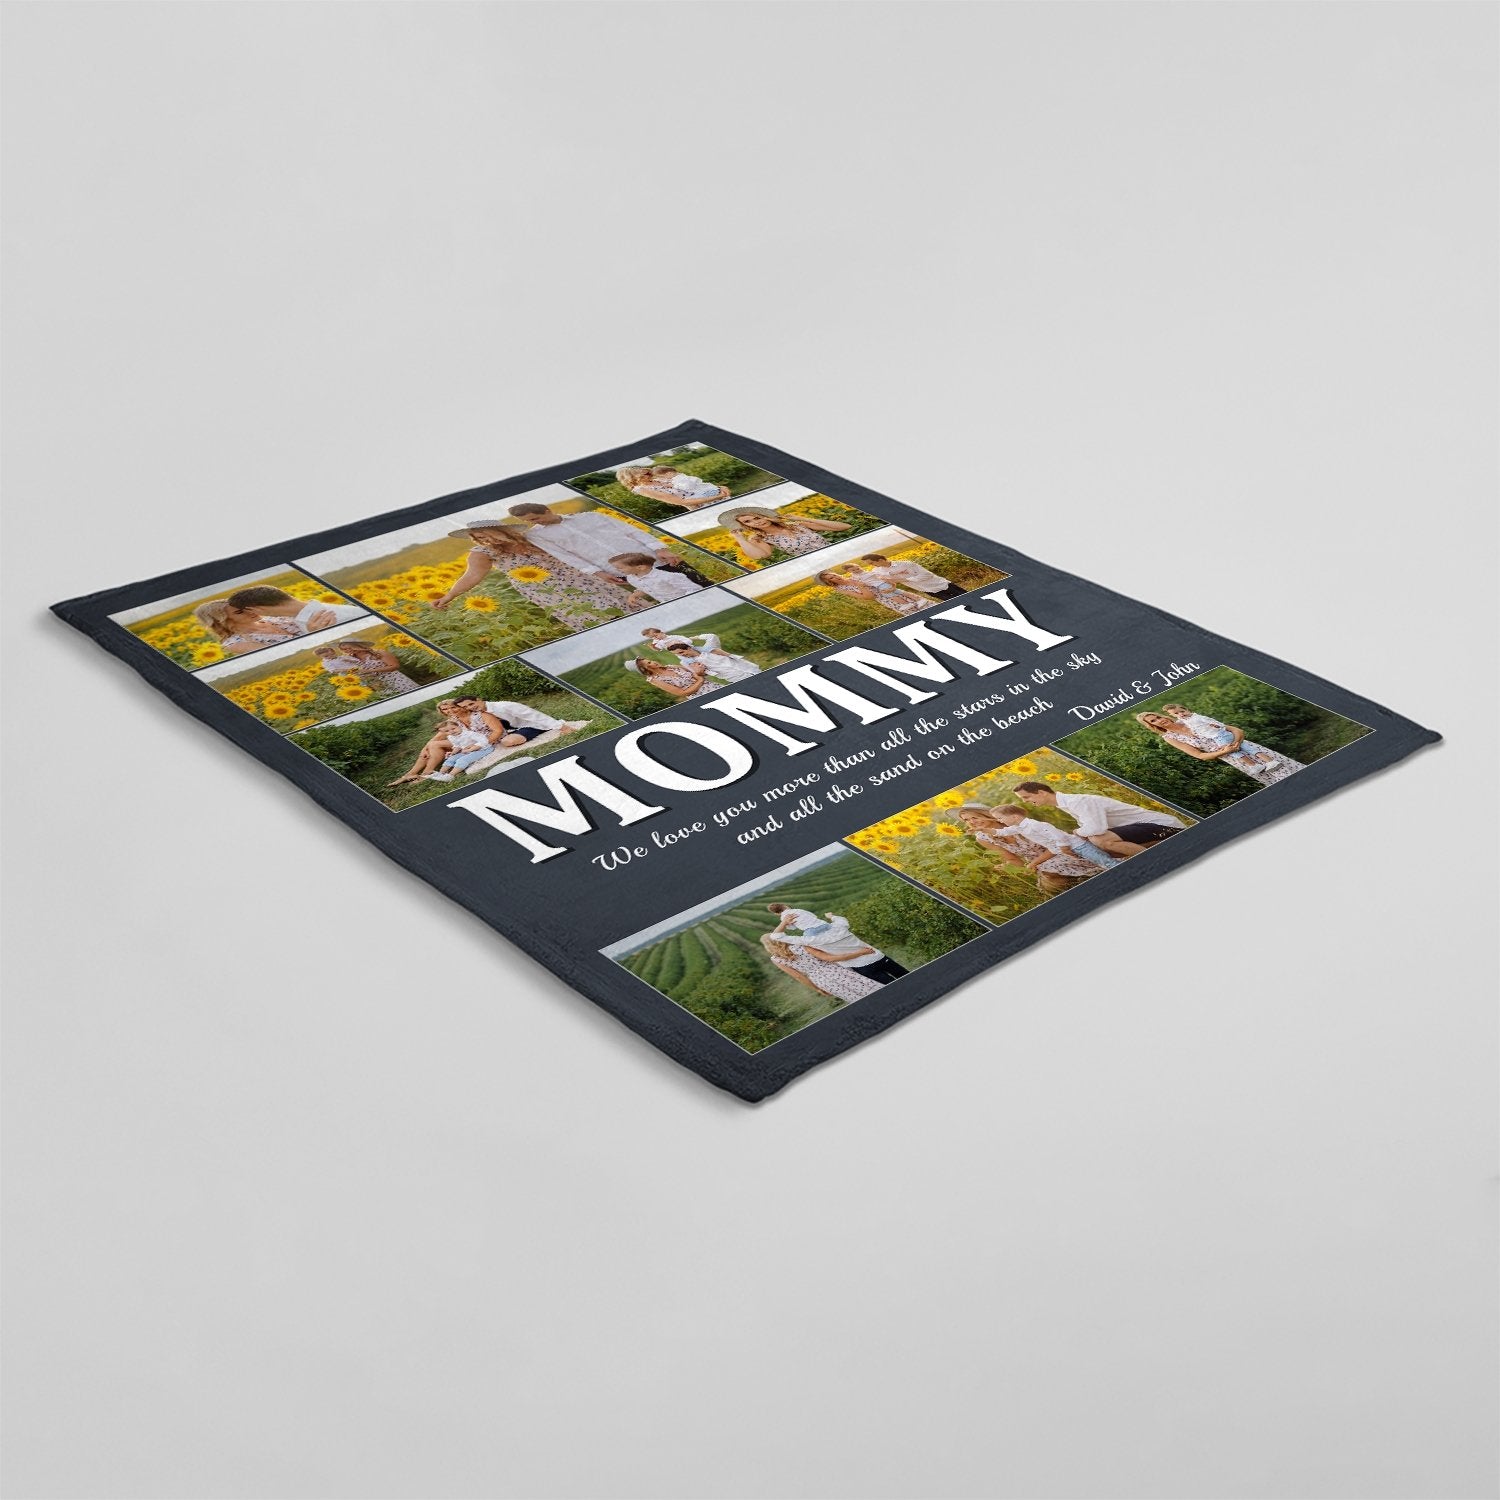 Mommy Custom Photo Collage, 11 Pictures, Personalized Name And Text Blanket